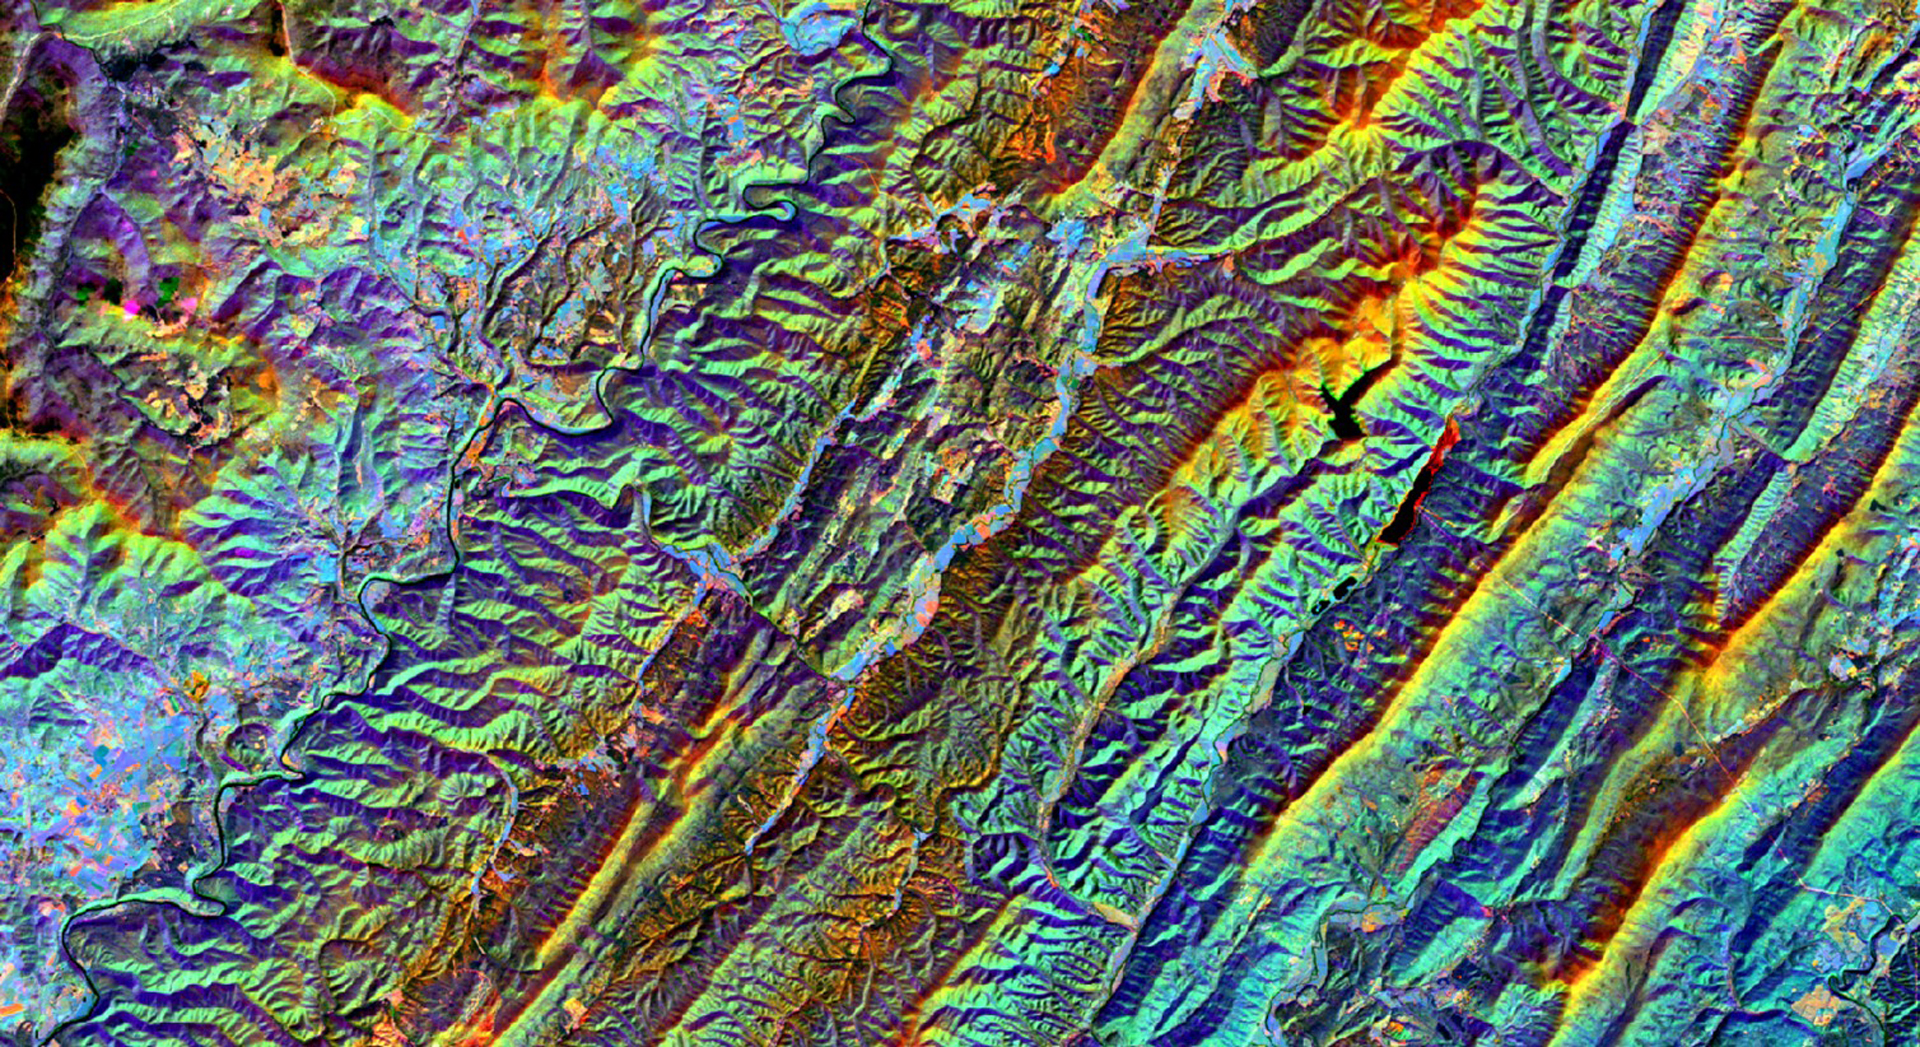 Split-season composite from May (leaf-on) and November (leaf-off) 2018 in the Allegheny Mountains of West Virginia. This Landsat 8 OLI imagery displays a color combination of SWIR_1 (leaf-on), SWIR_1 (leaf-off), and NIR (leaf-on). Urban areas are shown in pink, impervious surfaces in periwinkle, conifer forests in dark green, and exposed soil in orange. This stack, and others like it, are used for determining land cover classifications and collecting training data for forest restoration efforts.